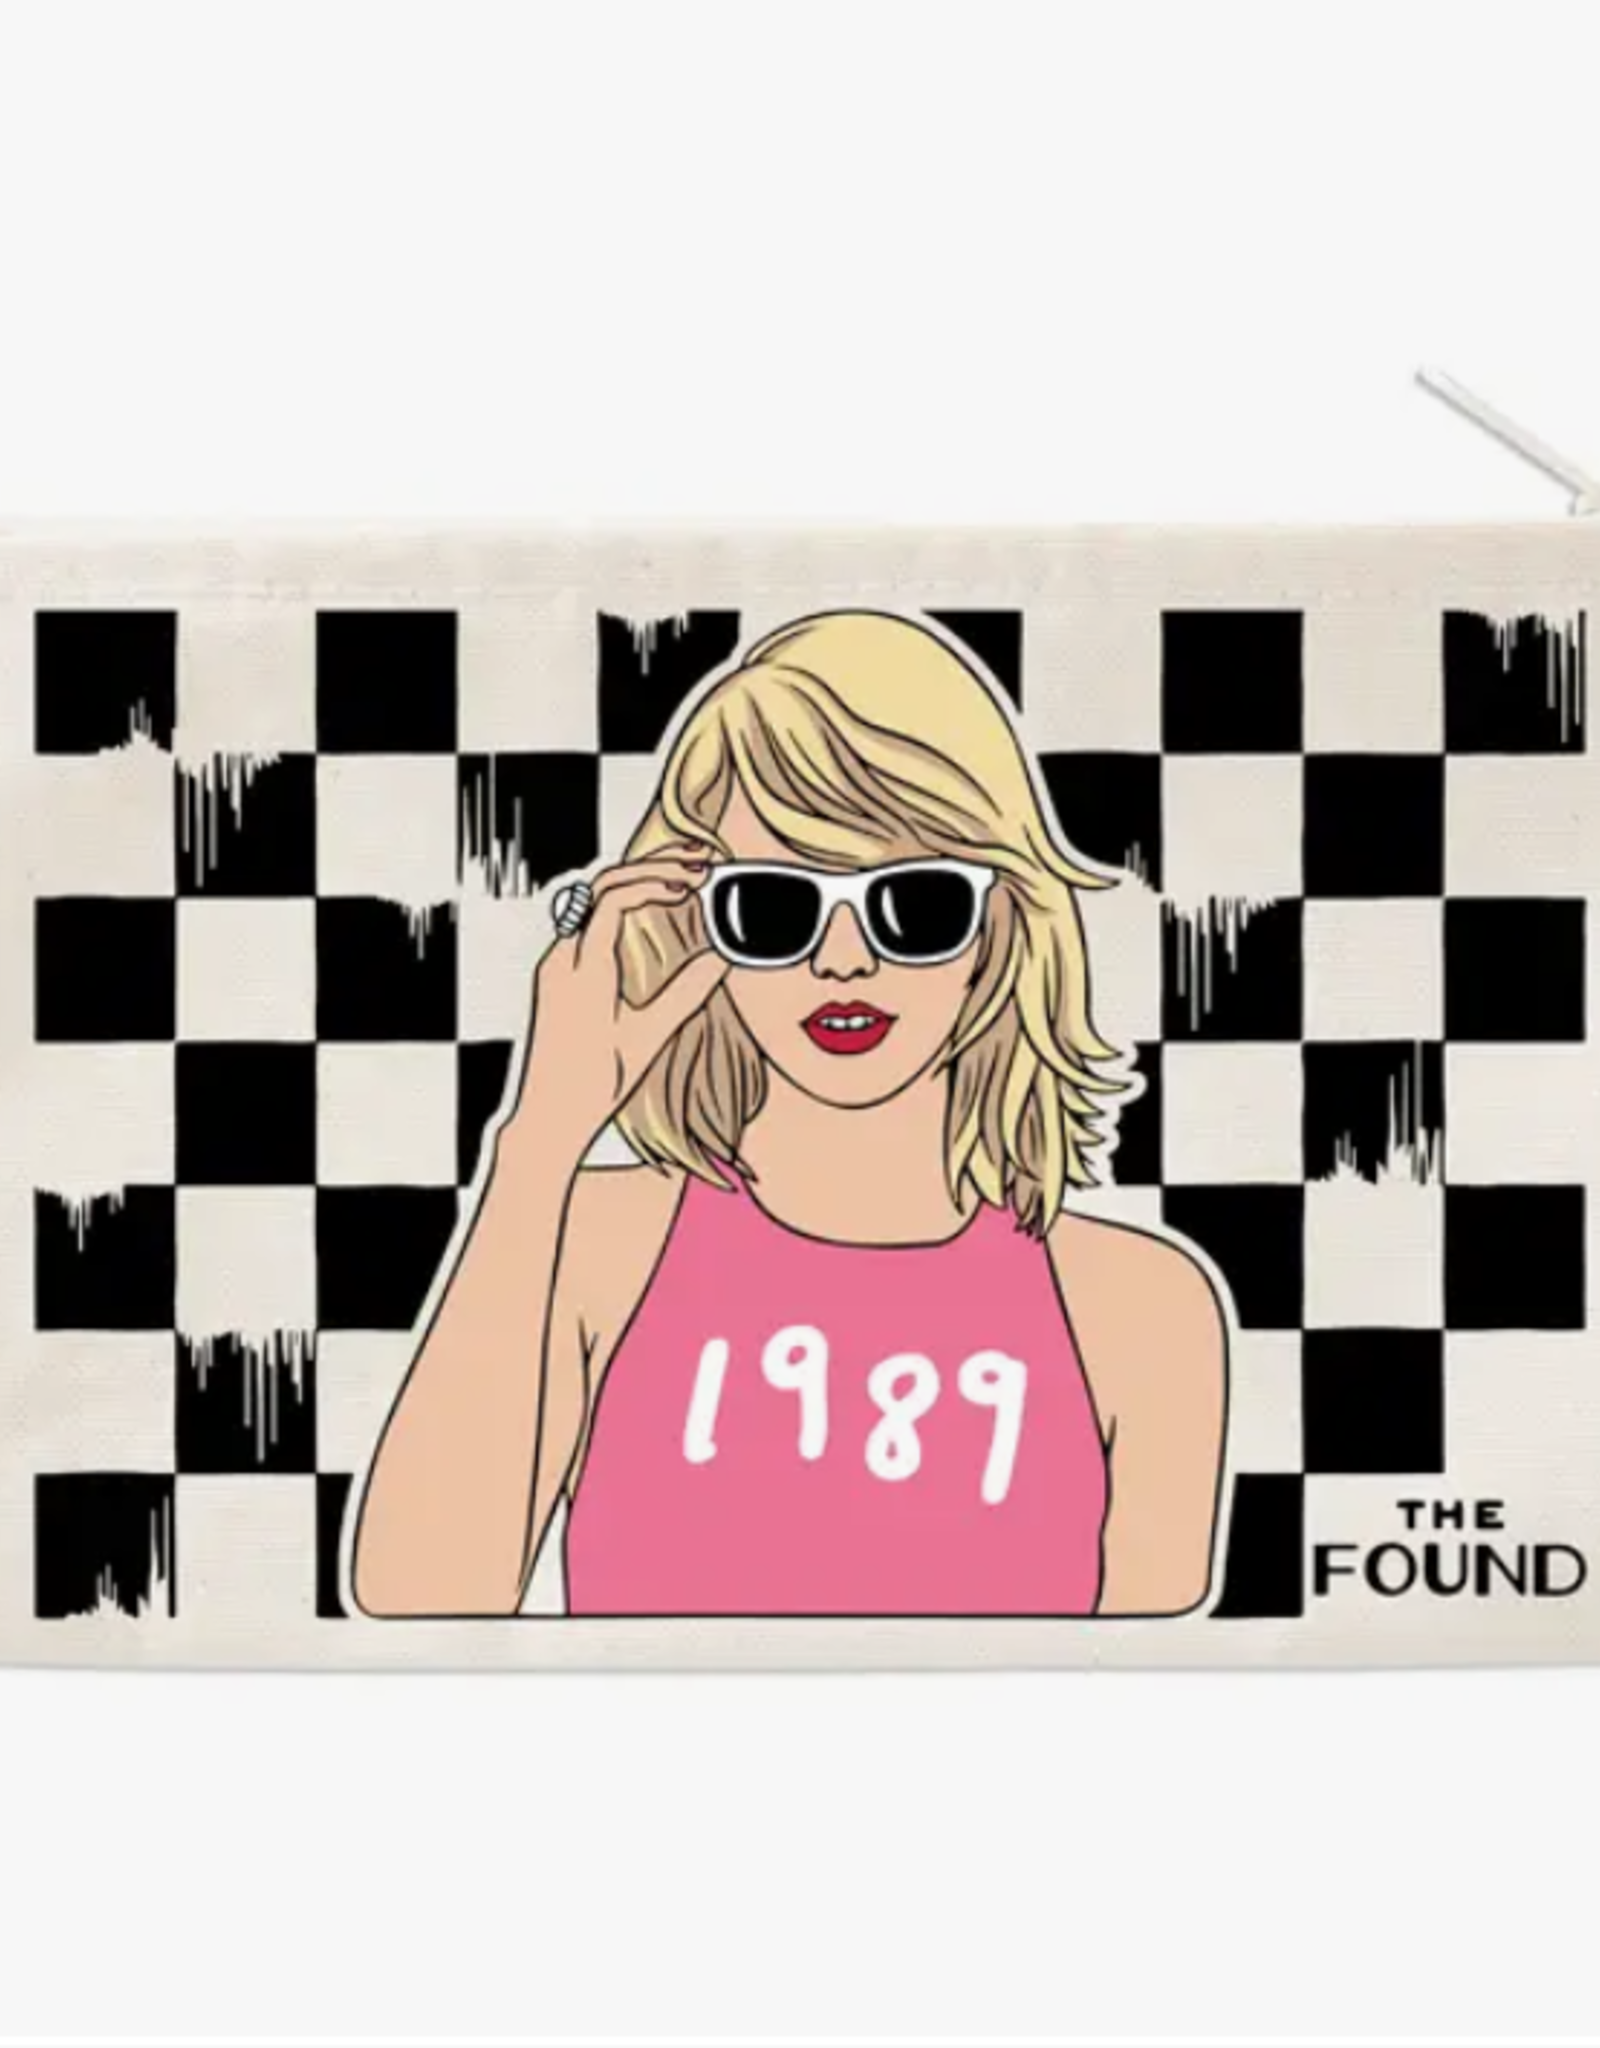 The Found Taylor Swfit 1989 Pouch